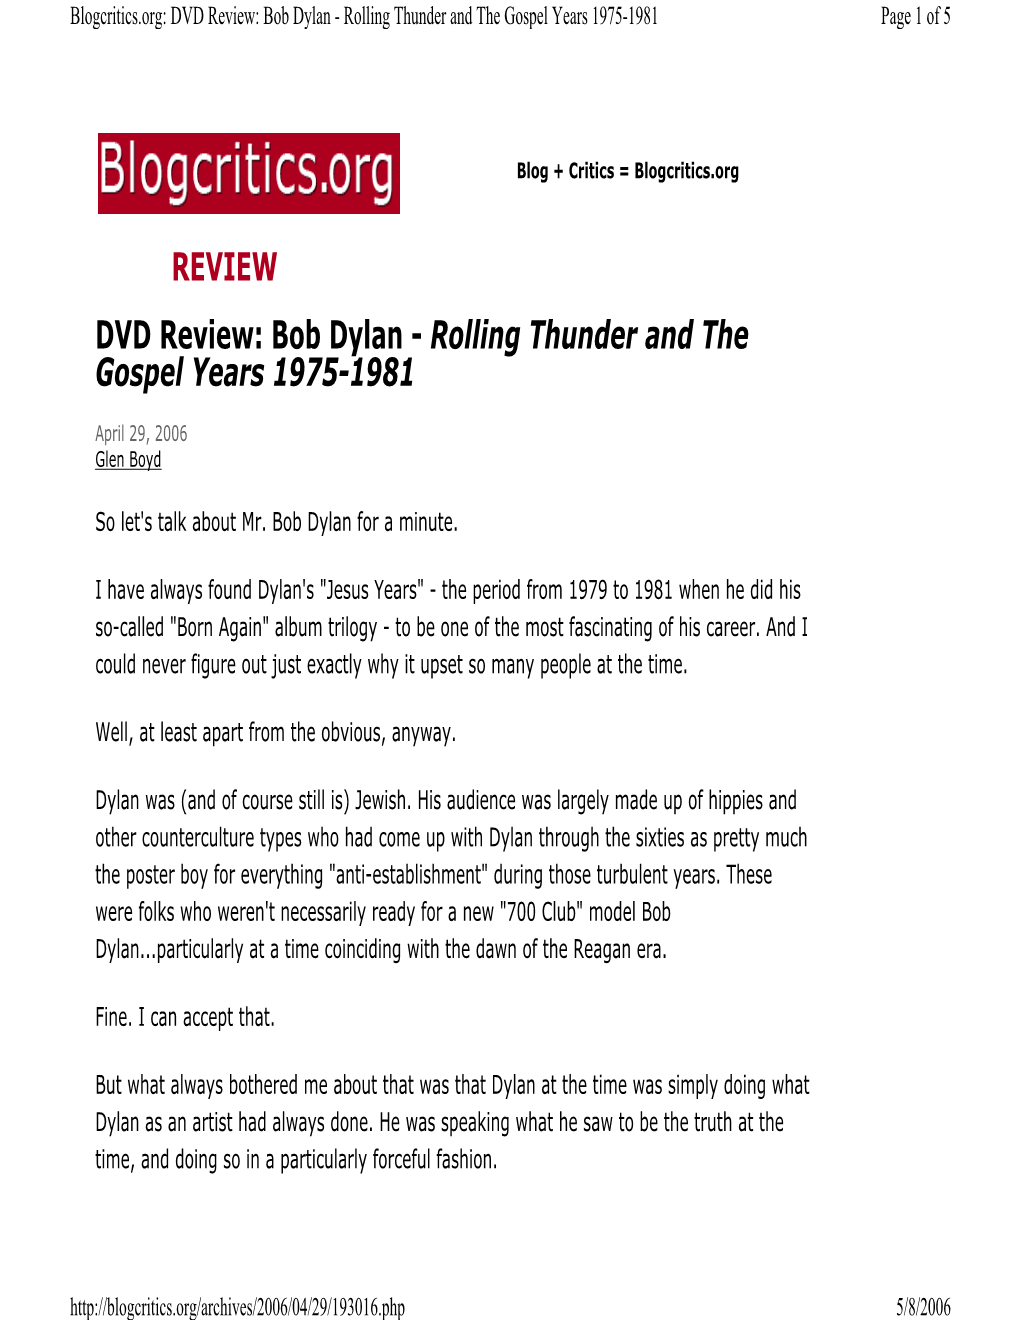 DVD Review: Bob Dylan - Rolling Thunder and the Gospel Years 1975-1981 Page 1 of 5